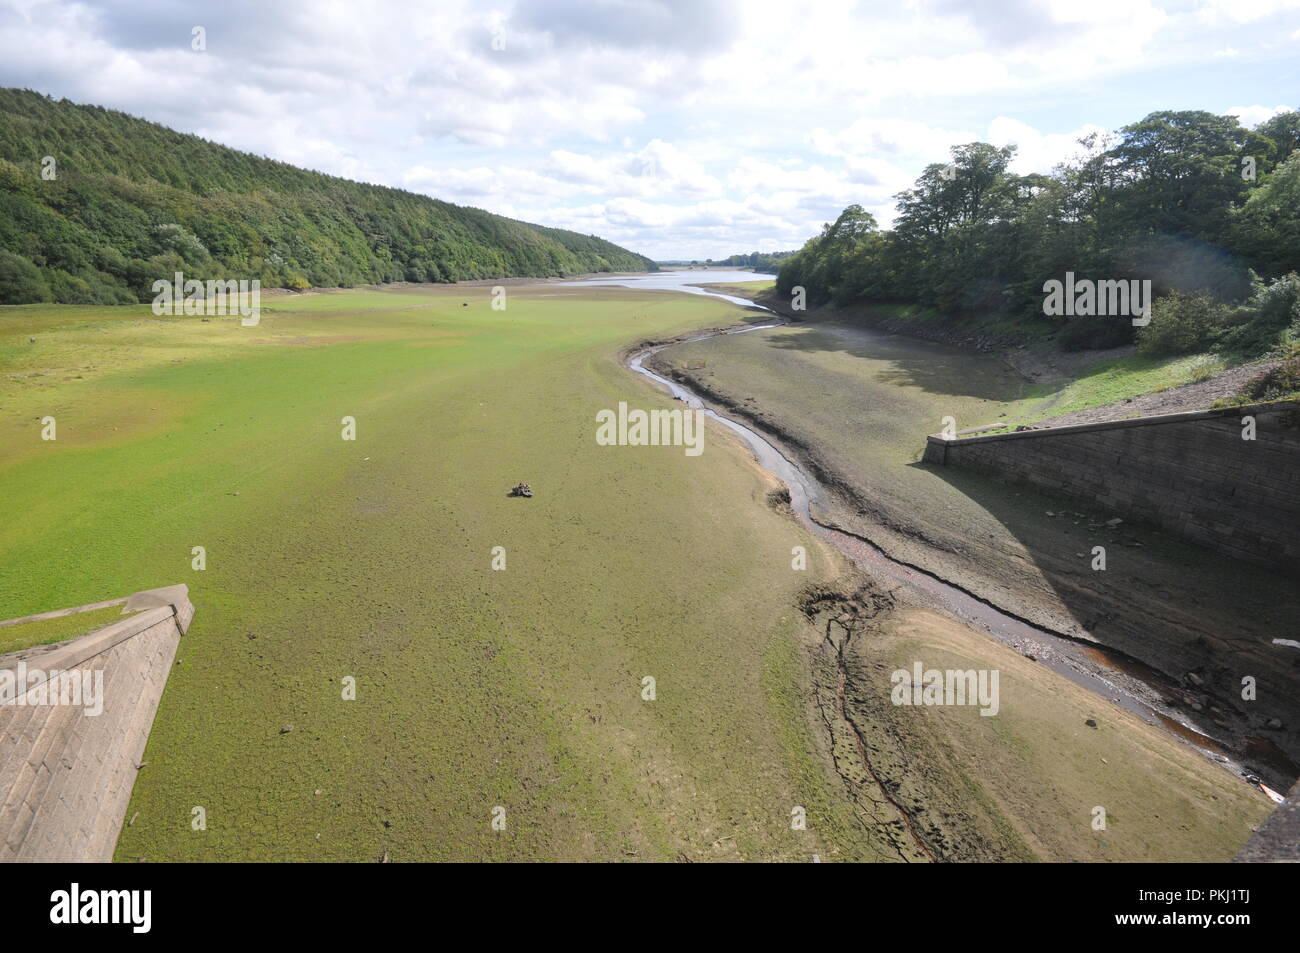 Leeds, Yorkshire UK. 13th Sept 2018. Water levels remain low at Lindley Reservoir in the Washubrn Valley, outside the Leeds/Bradford conurbations after a record hot summer. Lindley is just one of a string of reservoirs in the Washburn valley which feed water to major towns and cities in the area. credit David Hickes/Alamy Live News. Stock Photo